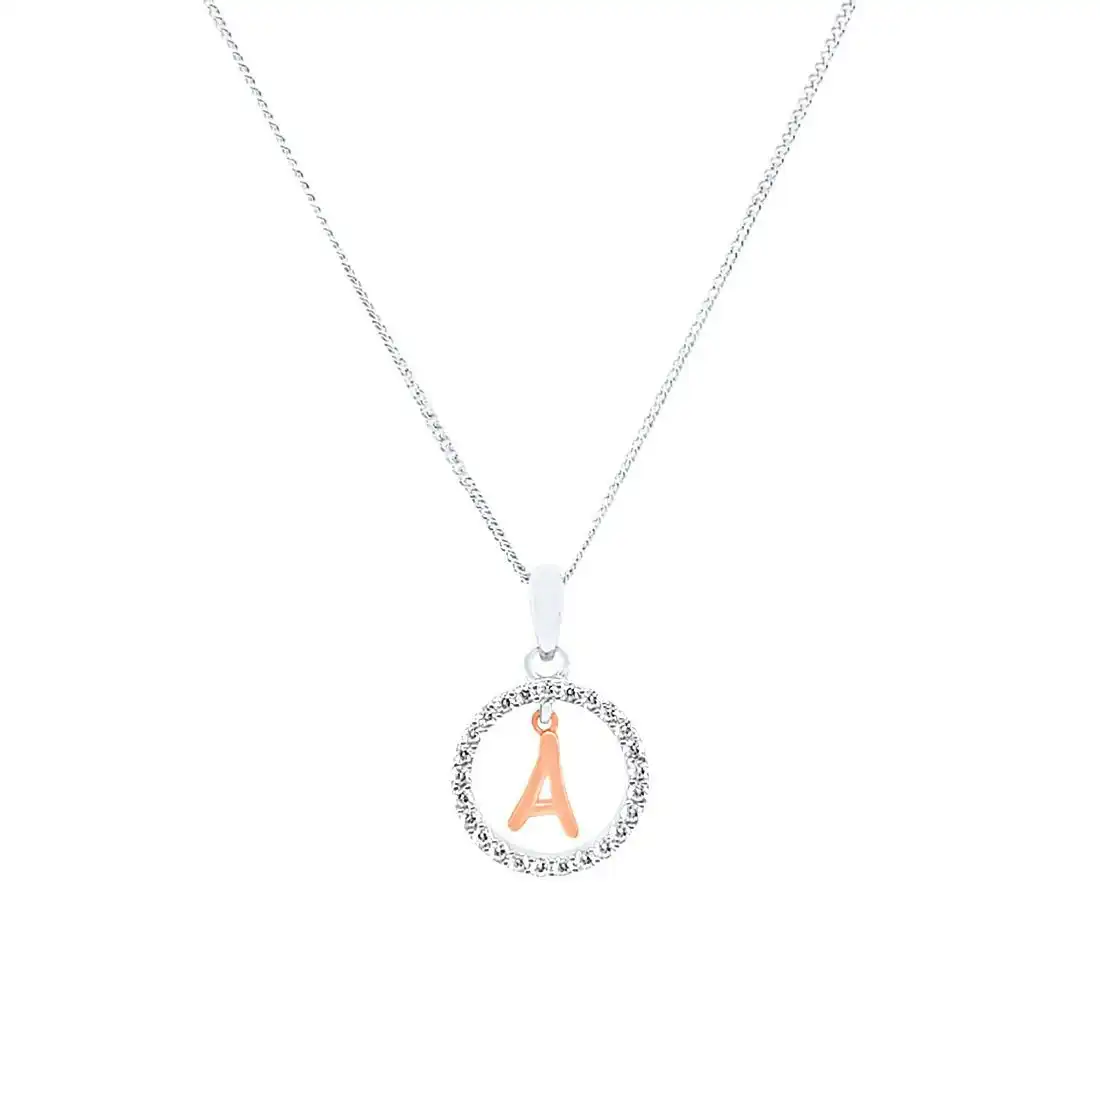 45cm Sterling Silver & Rose Plated Initial Necklace with Cubic Zirconias